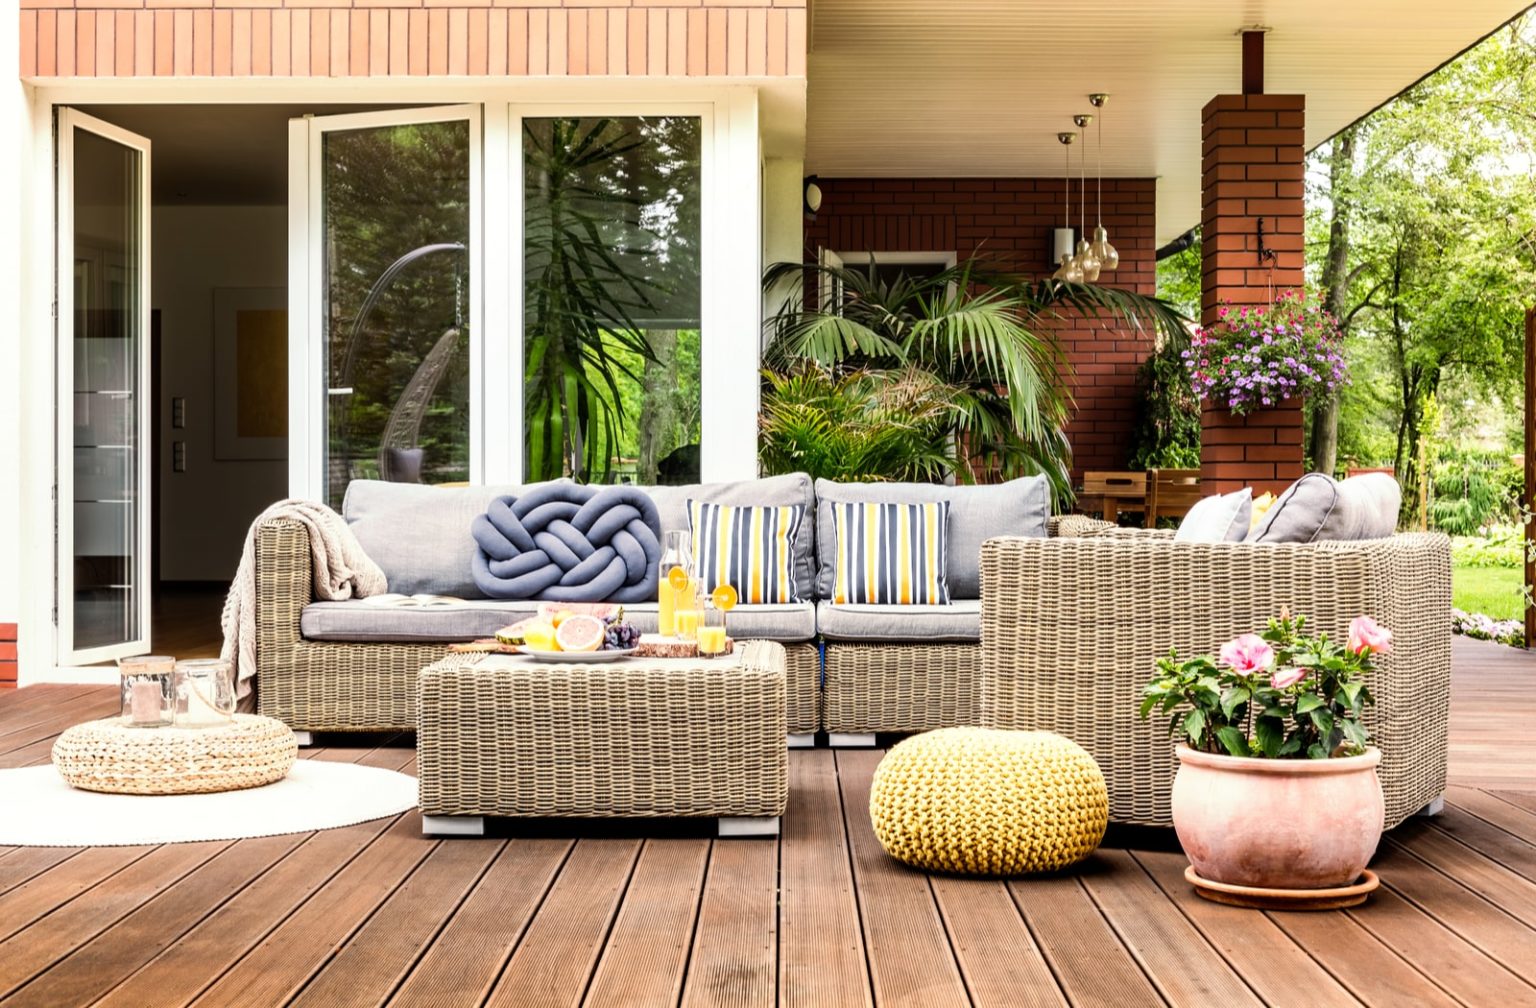 Wicker outdoor furniture surrounded by plants